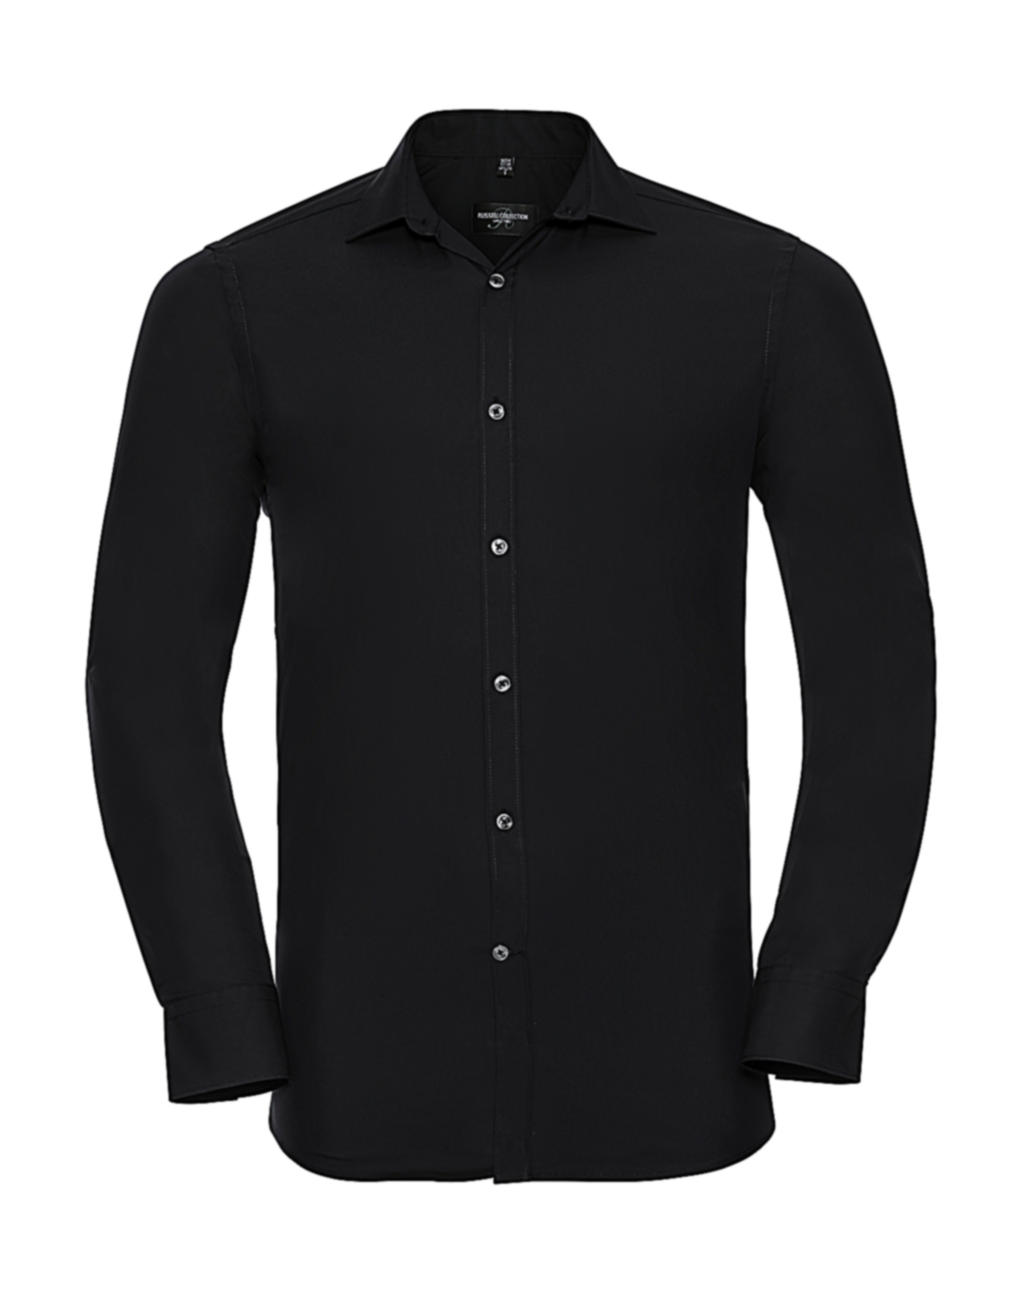  Mens LS Ultimate Stretch Shirt in Farbe Black